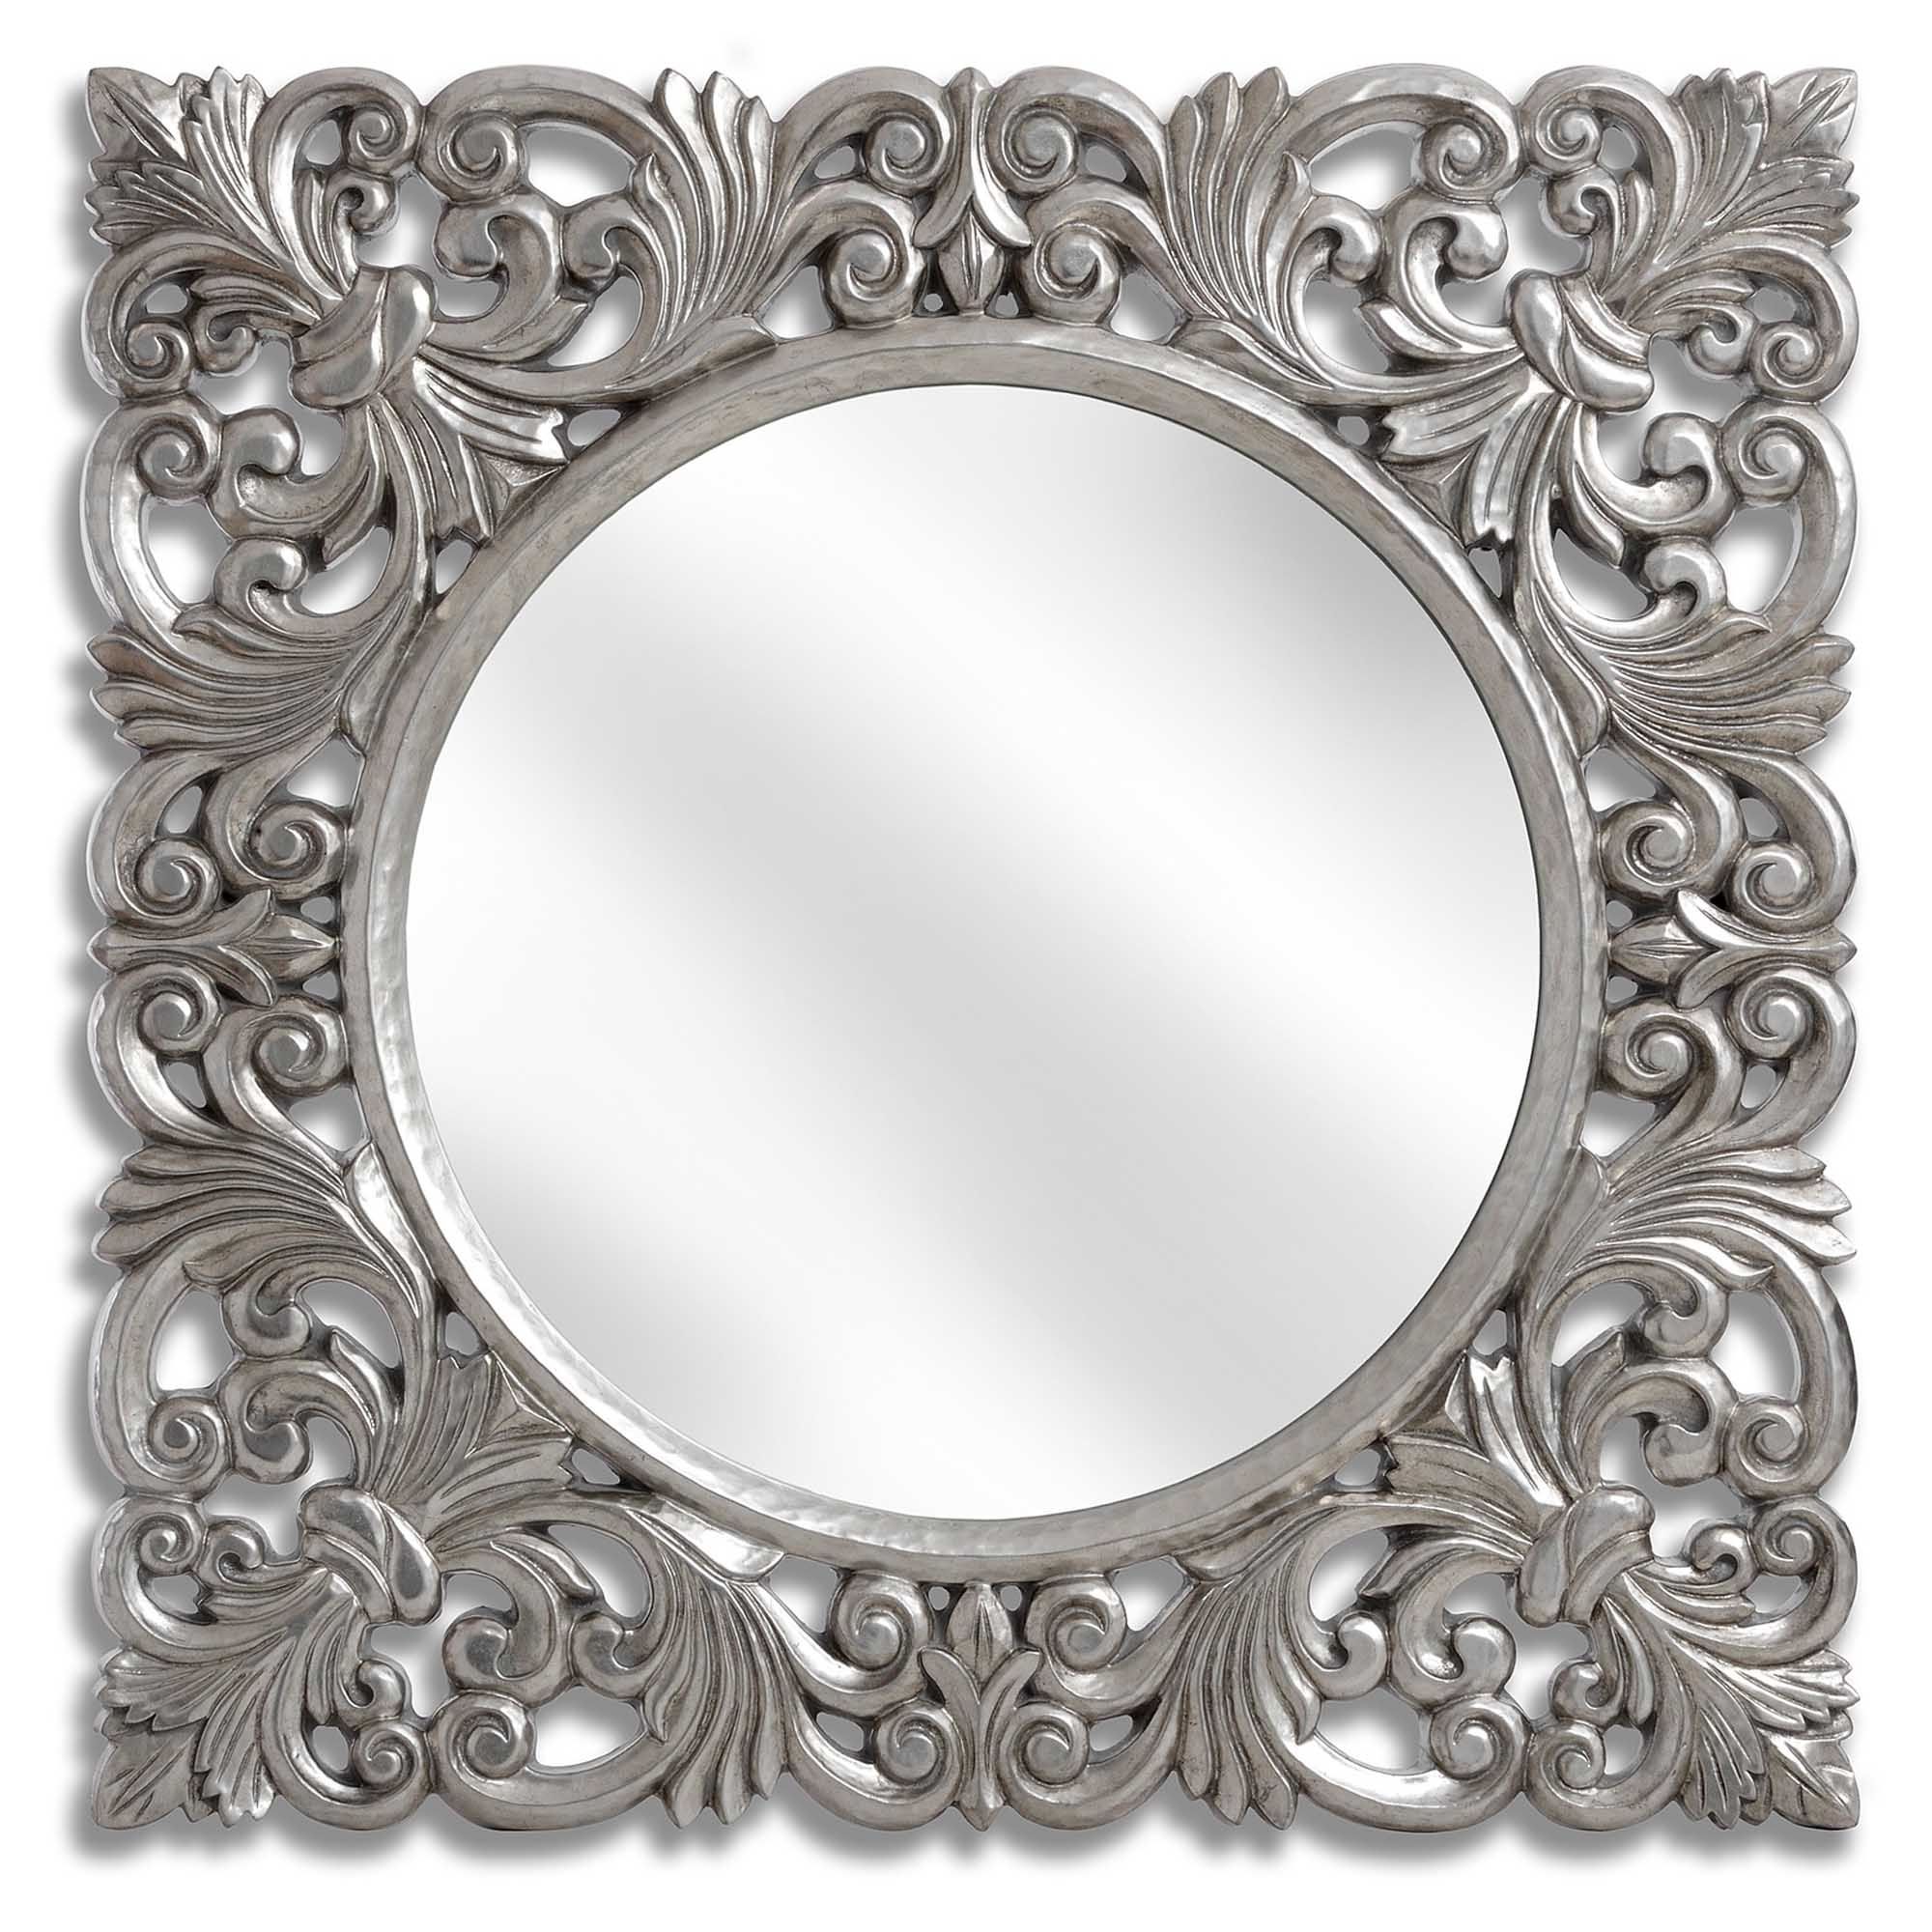 Silver Quatrefoil Wall Mirrors In Well Known Baroque Antique French Style Silver Wall Mirror (View 4 of 15)